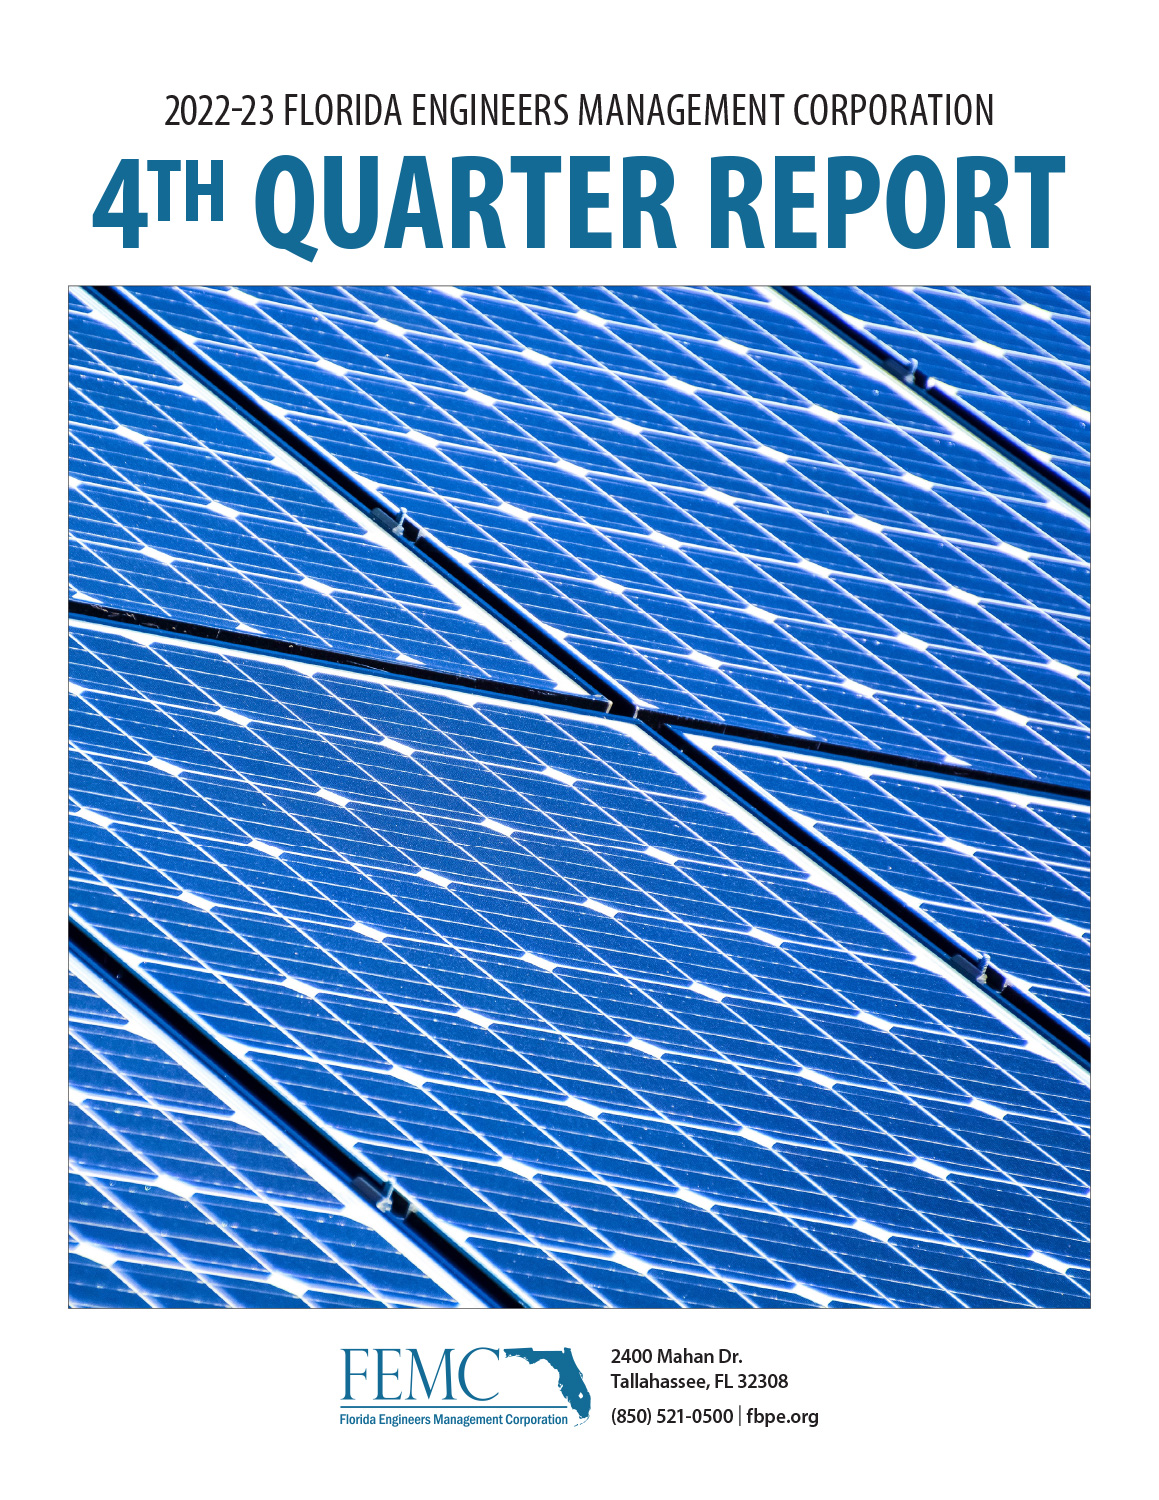 The cover of the 2022-23 Florida Engineers Management Corporation 4th Quarter Report